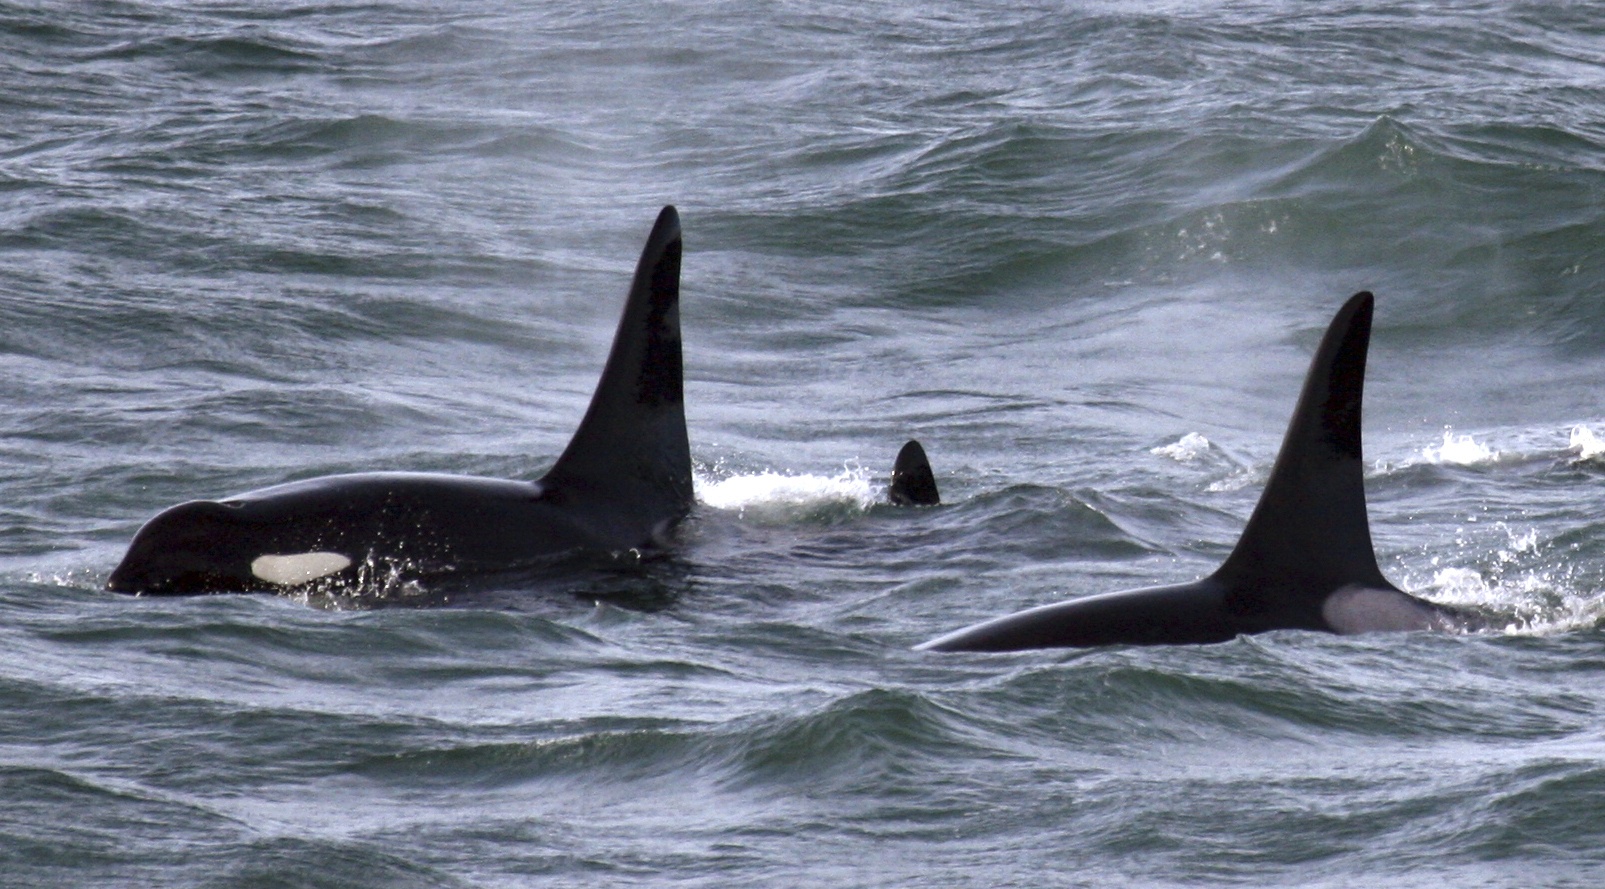 In this Feb. 27, 2016, file photo provided by NOAA Northwest Fisheries Science Center, an orca whale known as L95, right, swims with other whales from the L and K pods in the Pacific Ocean near the mouth of the Columbia River near Ilwaco days after being fitted with a satellite tag. (NOAA Northwest Fisheries Science Center via AP)